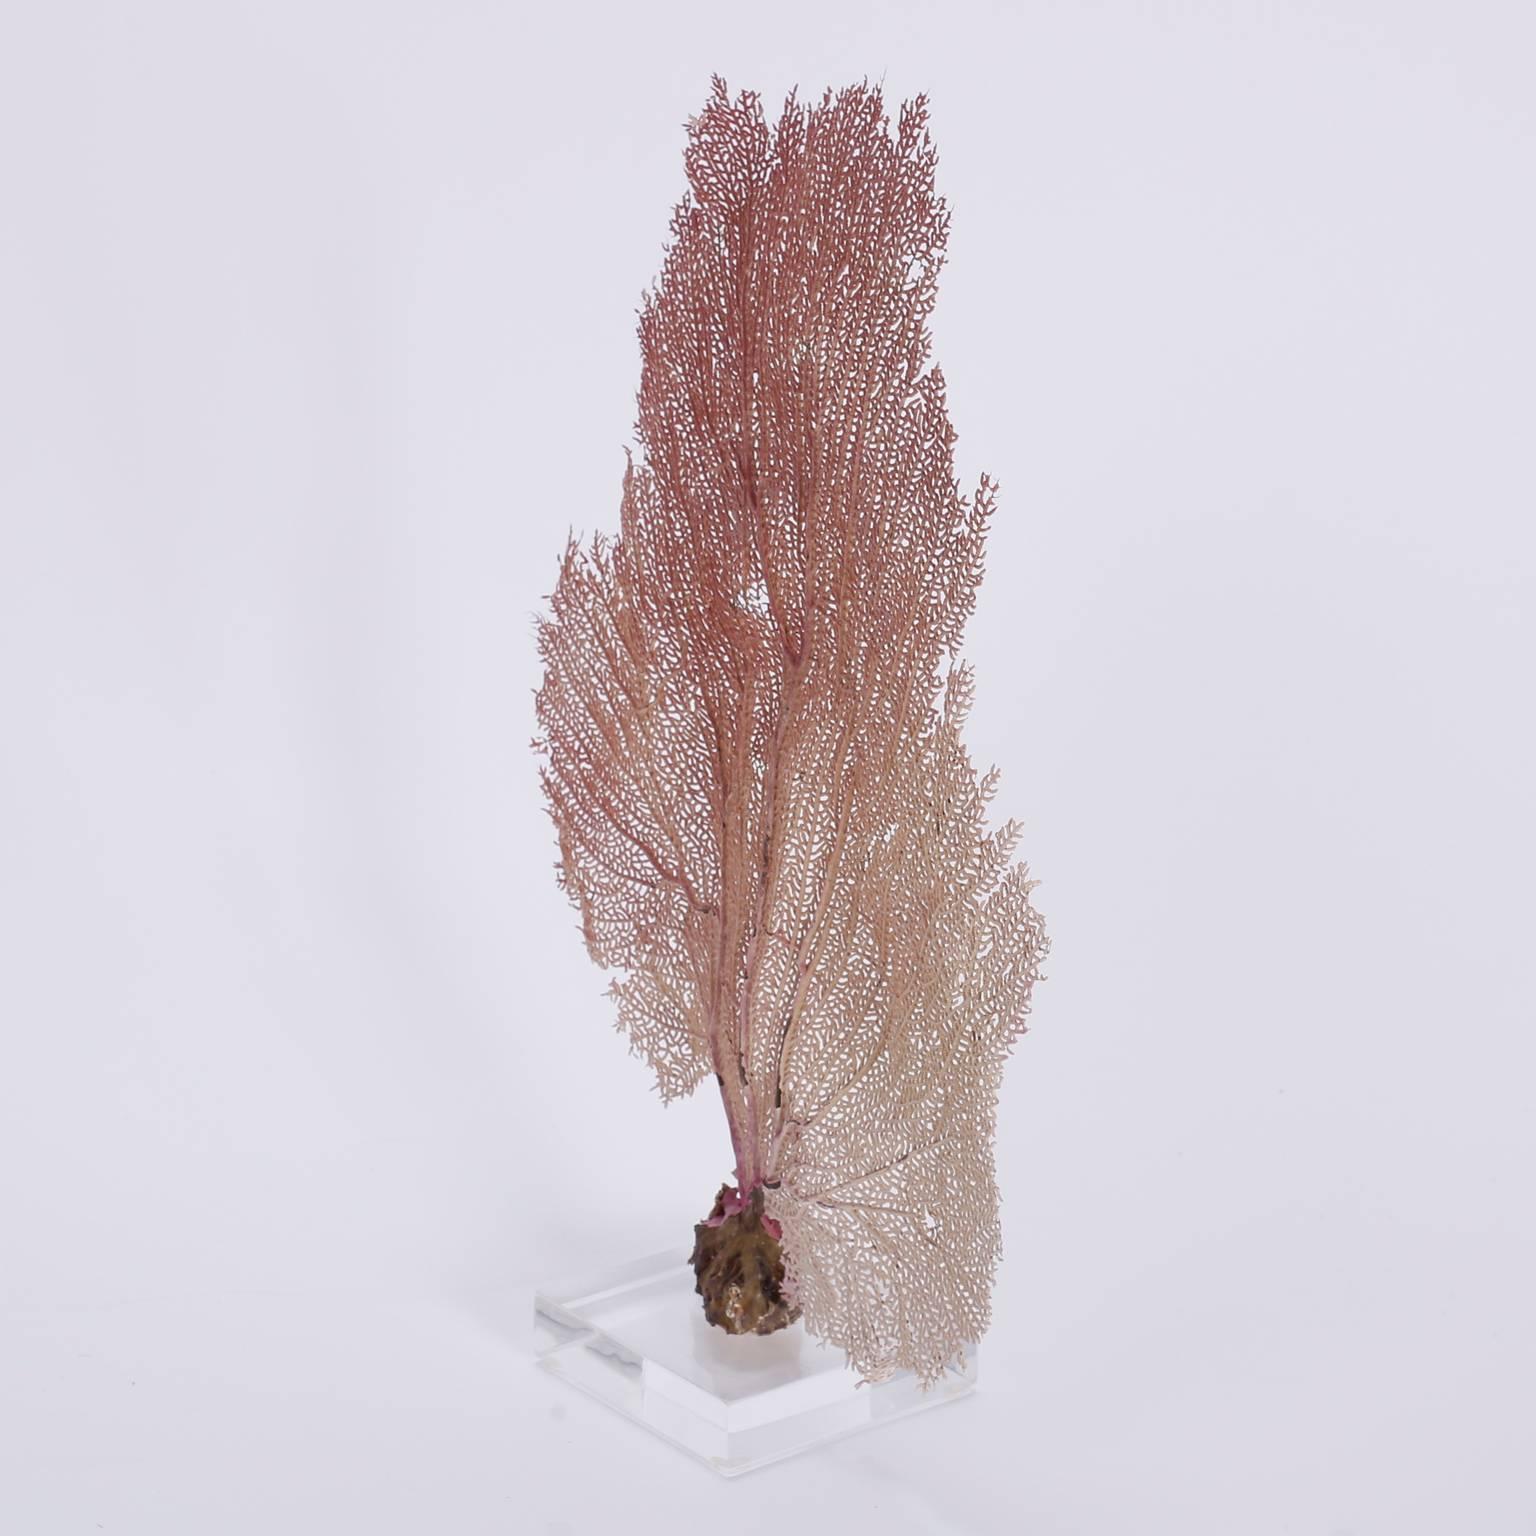 Authentic pink Bahama sea fan with its soft hues and glorious organic form. Presented on a lucite base. 